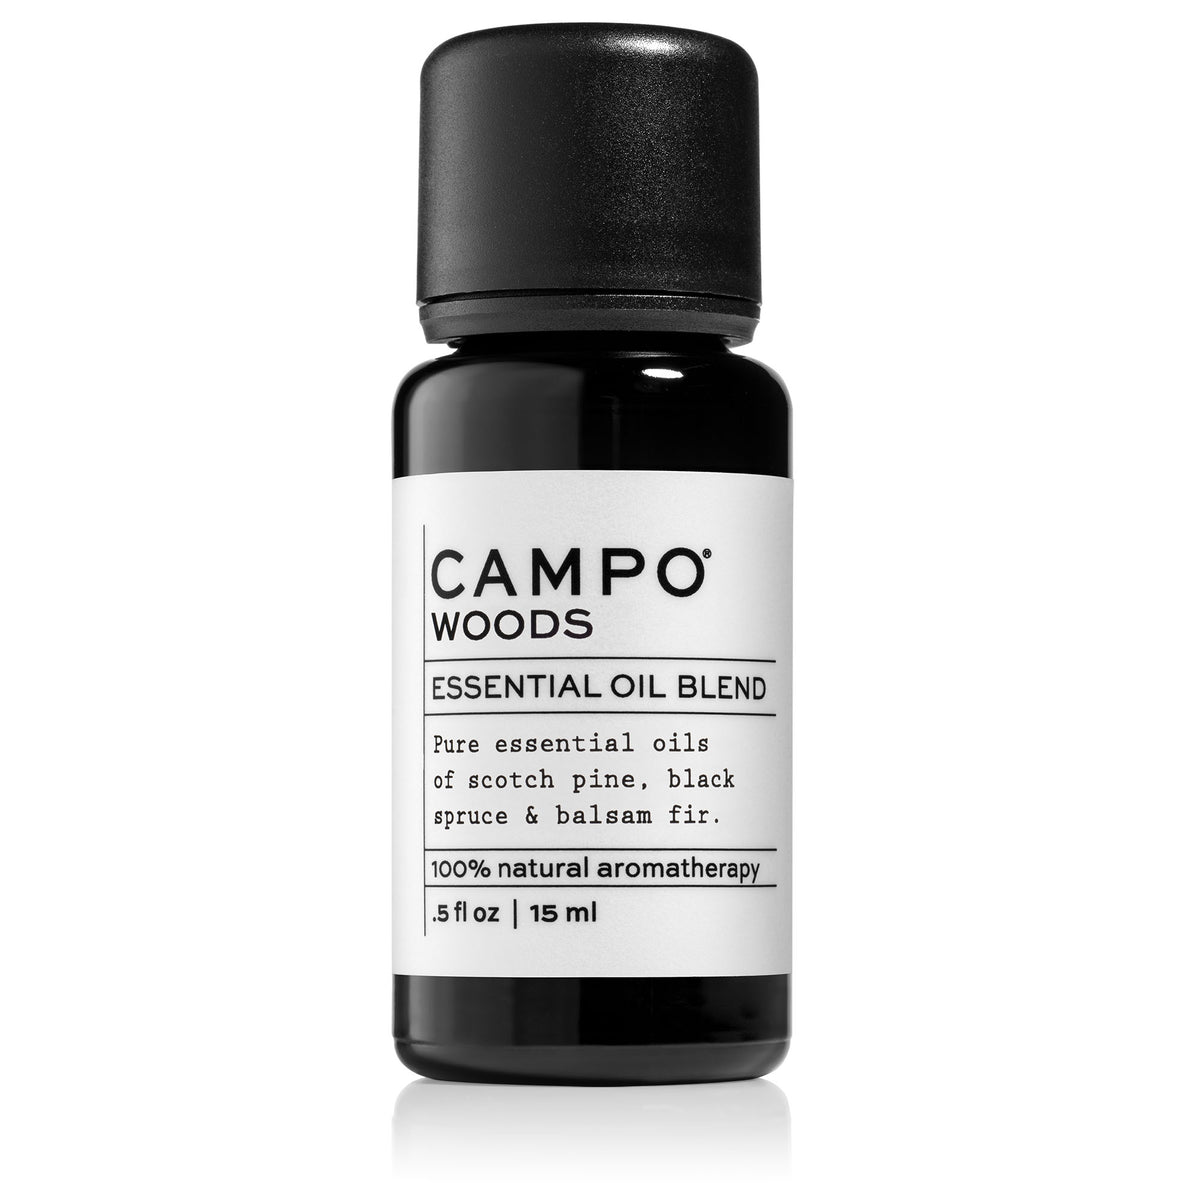 Campo Beauty WOODS Blend 15 ml Essential Oil. Escape to the woods with this 100% pure essential oil blend of pine scotch, siberian fir, balsam fir, black spruce, and bergamot.